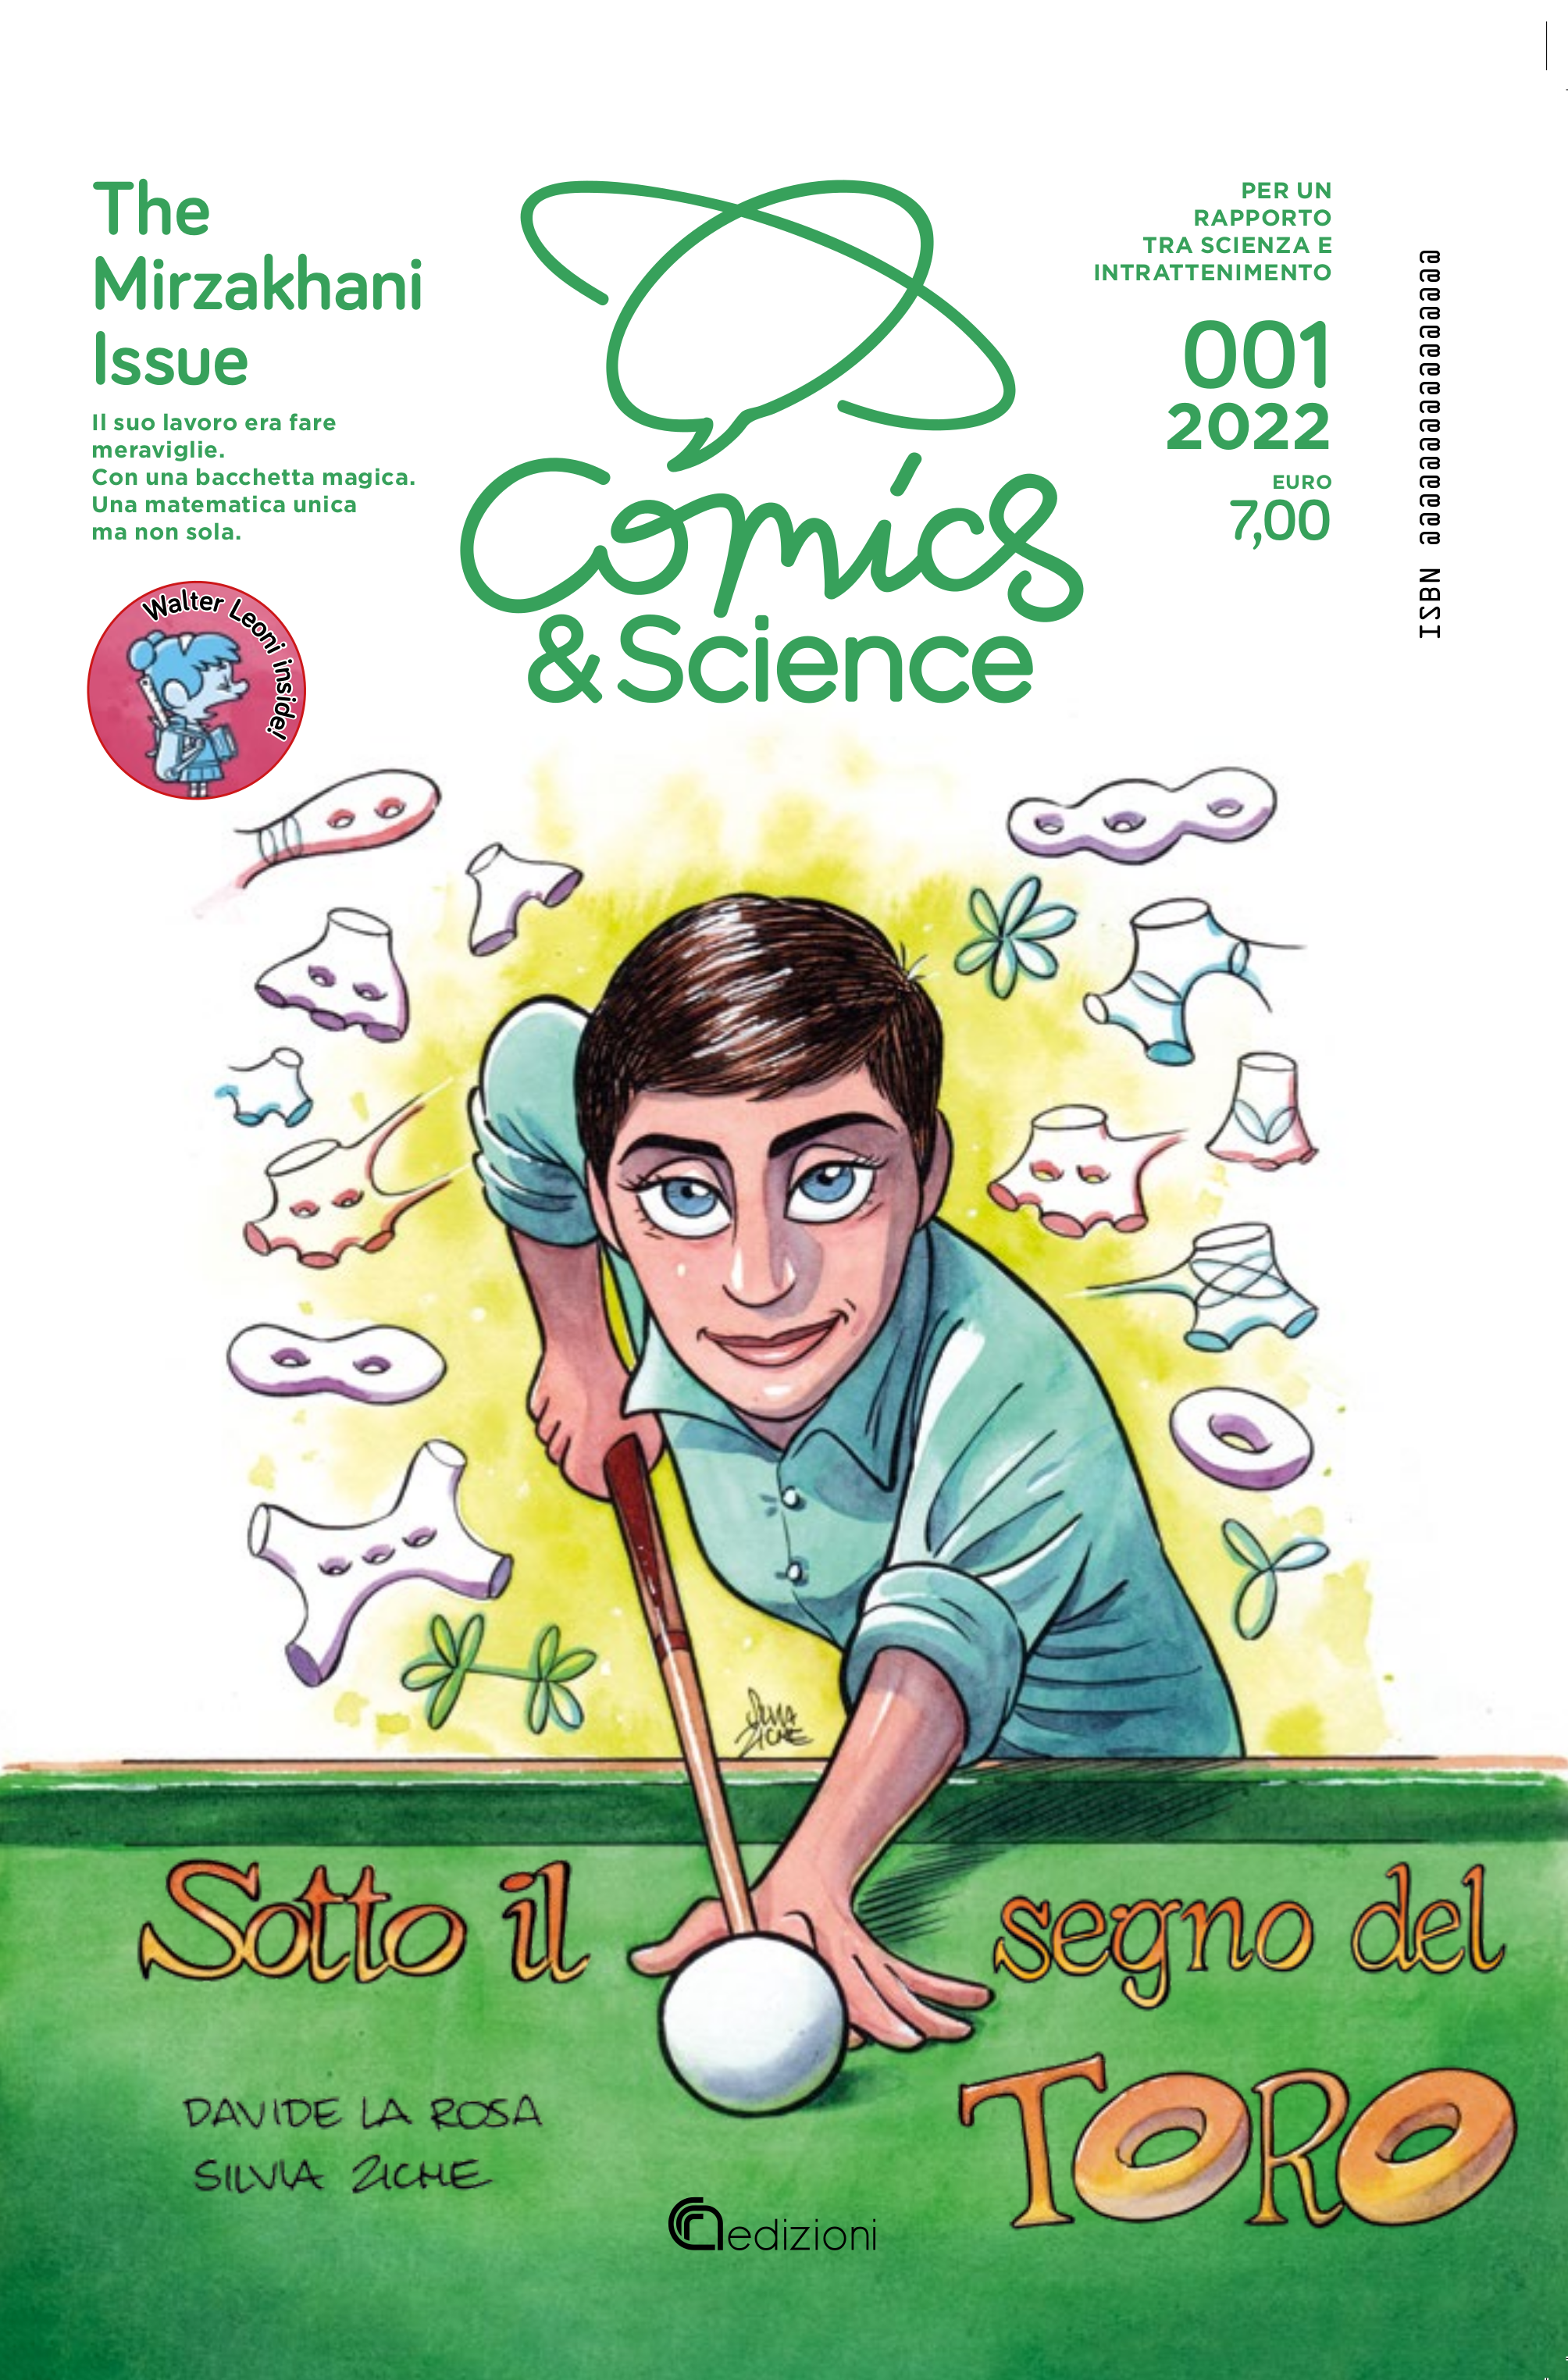 Cover of the Italian edition of "The Mirzakhani Issue"